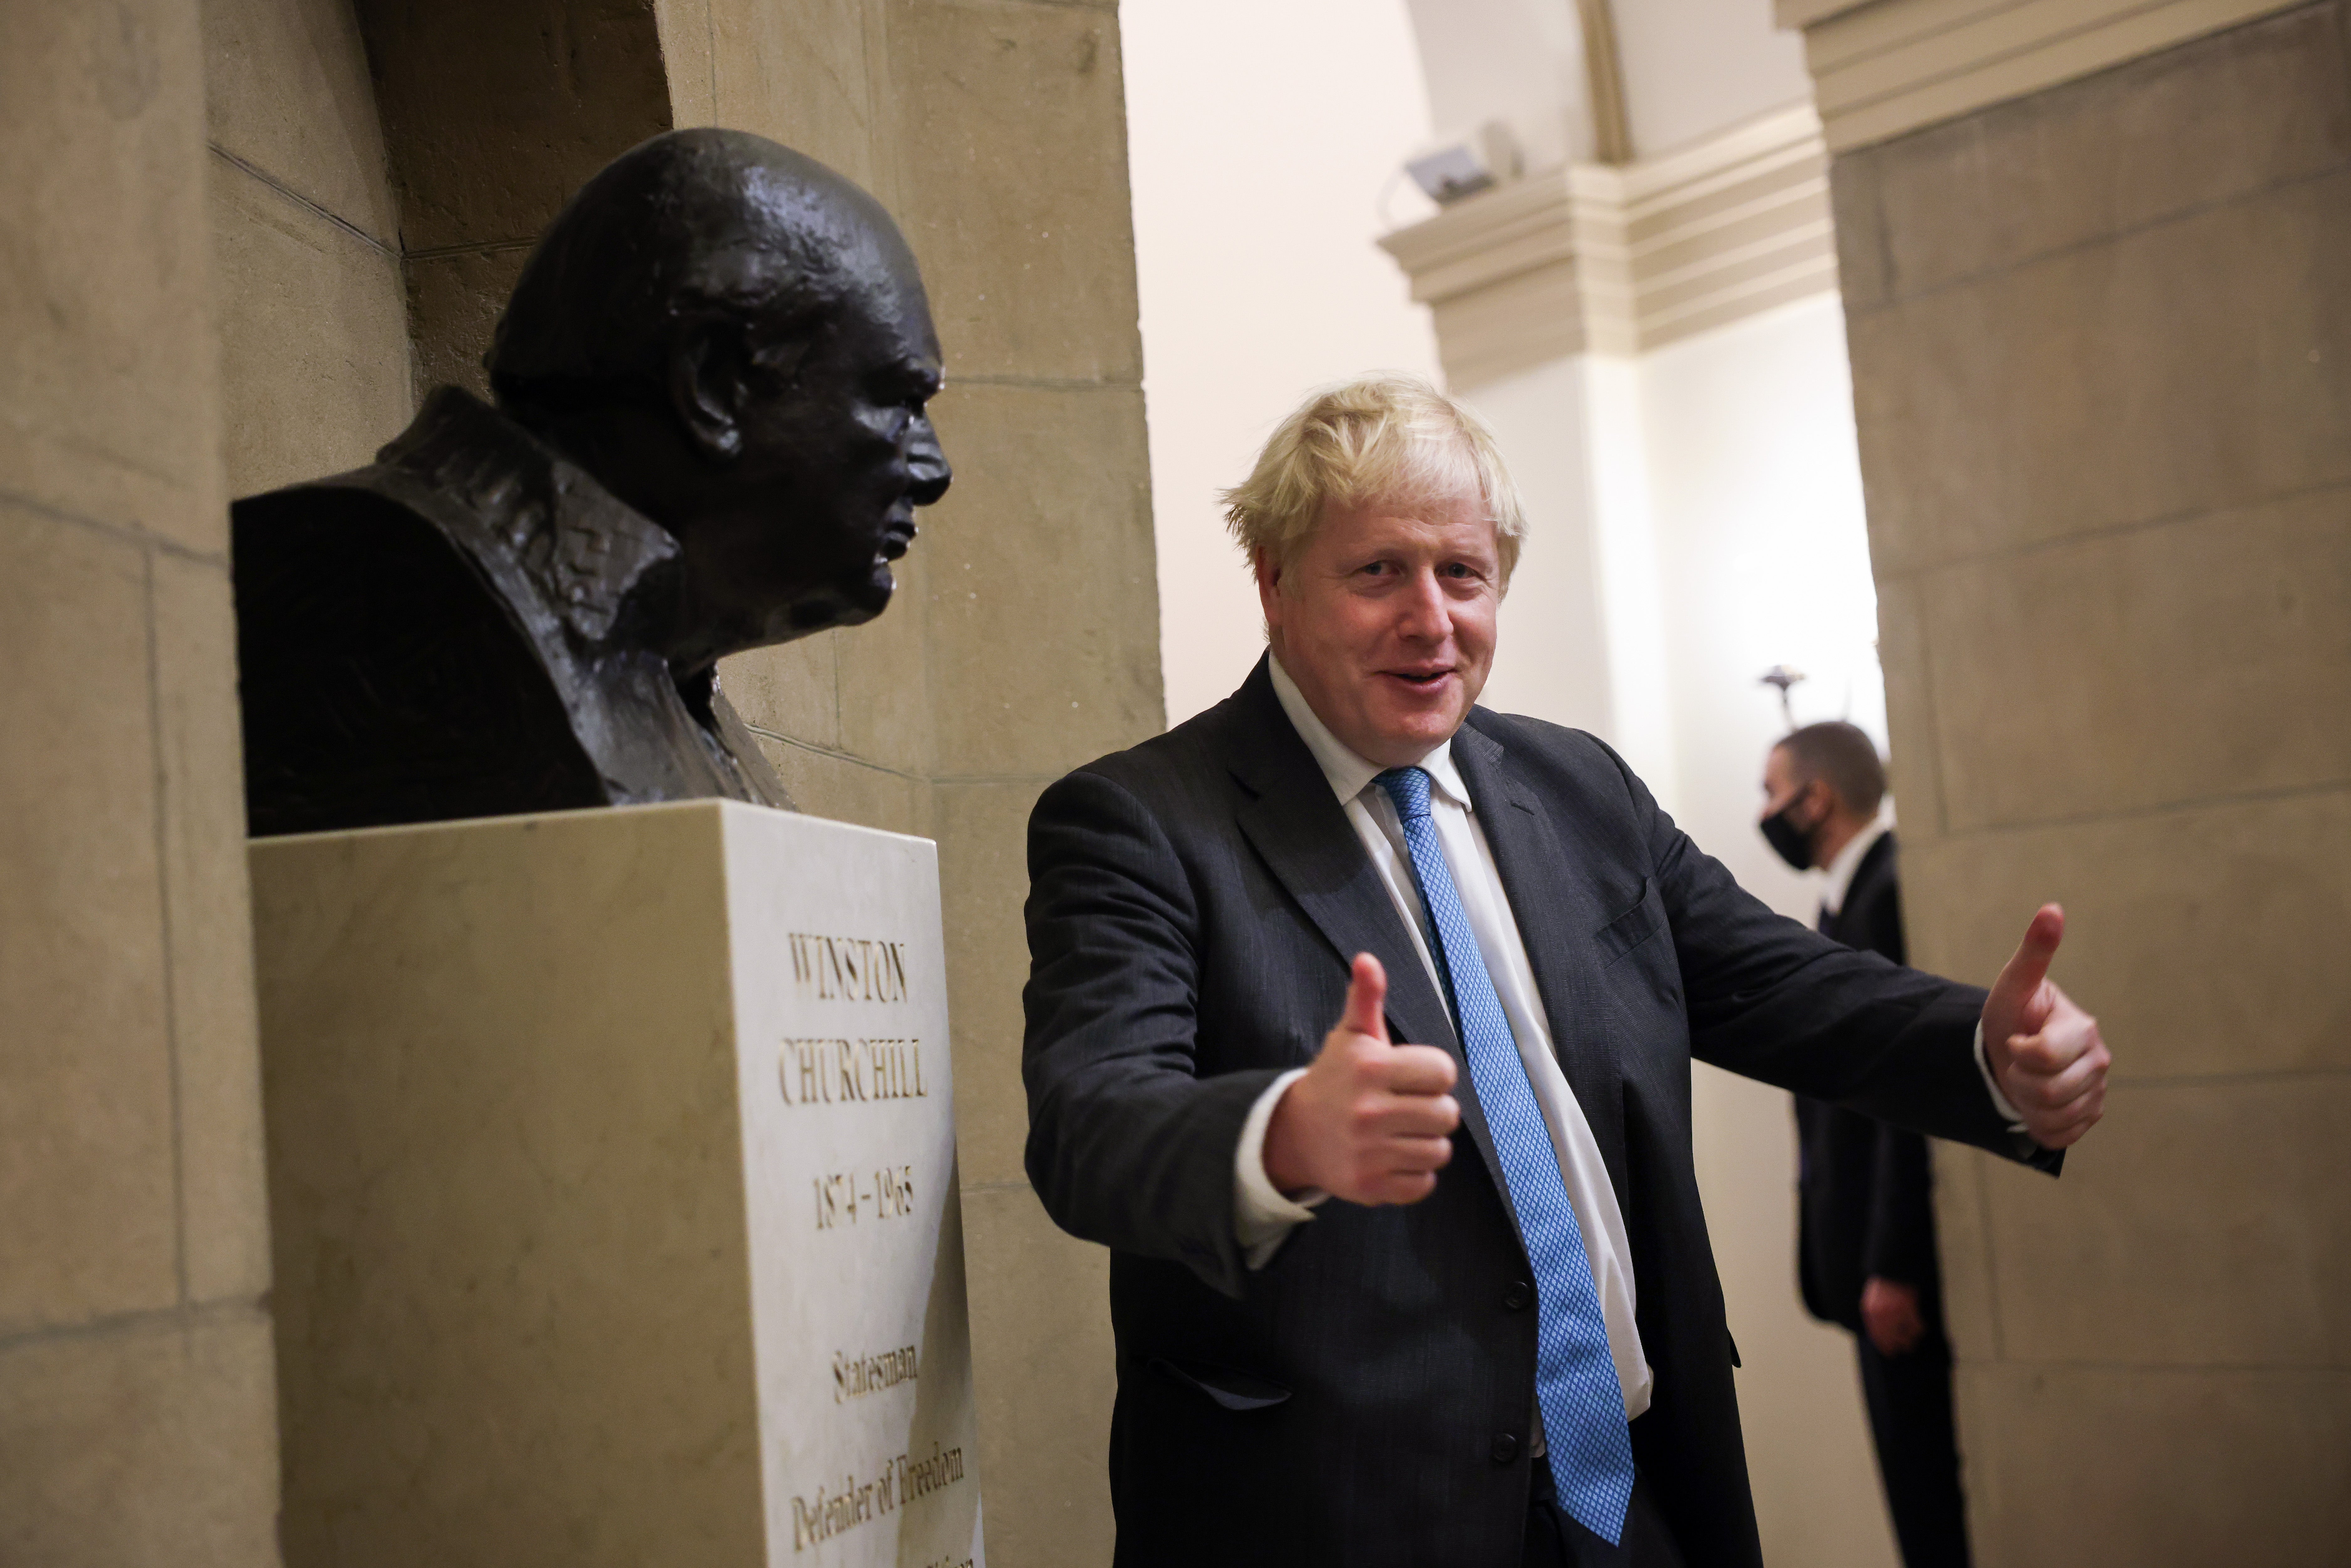 British Prime Minister Boris Johnson stops to look at a bust of Winston Churchill during a trip to Washington in September 202